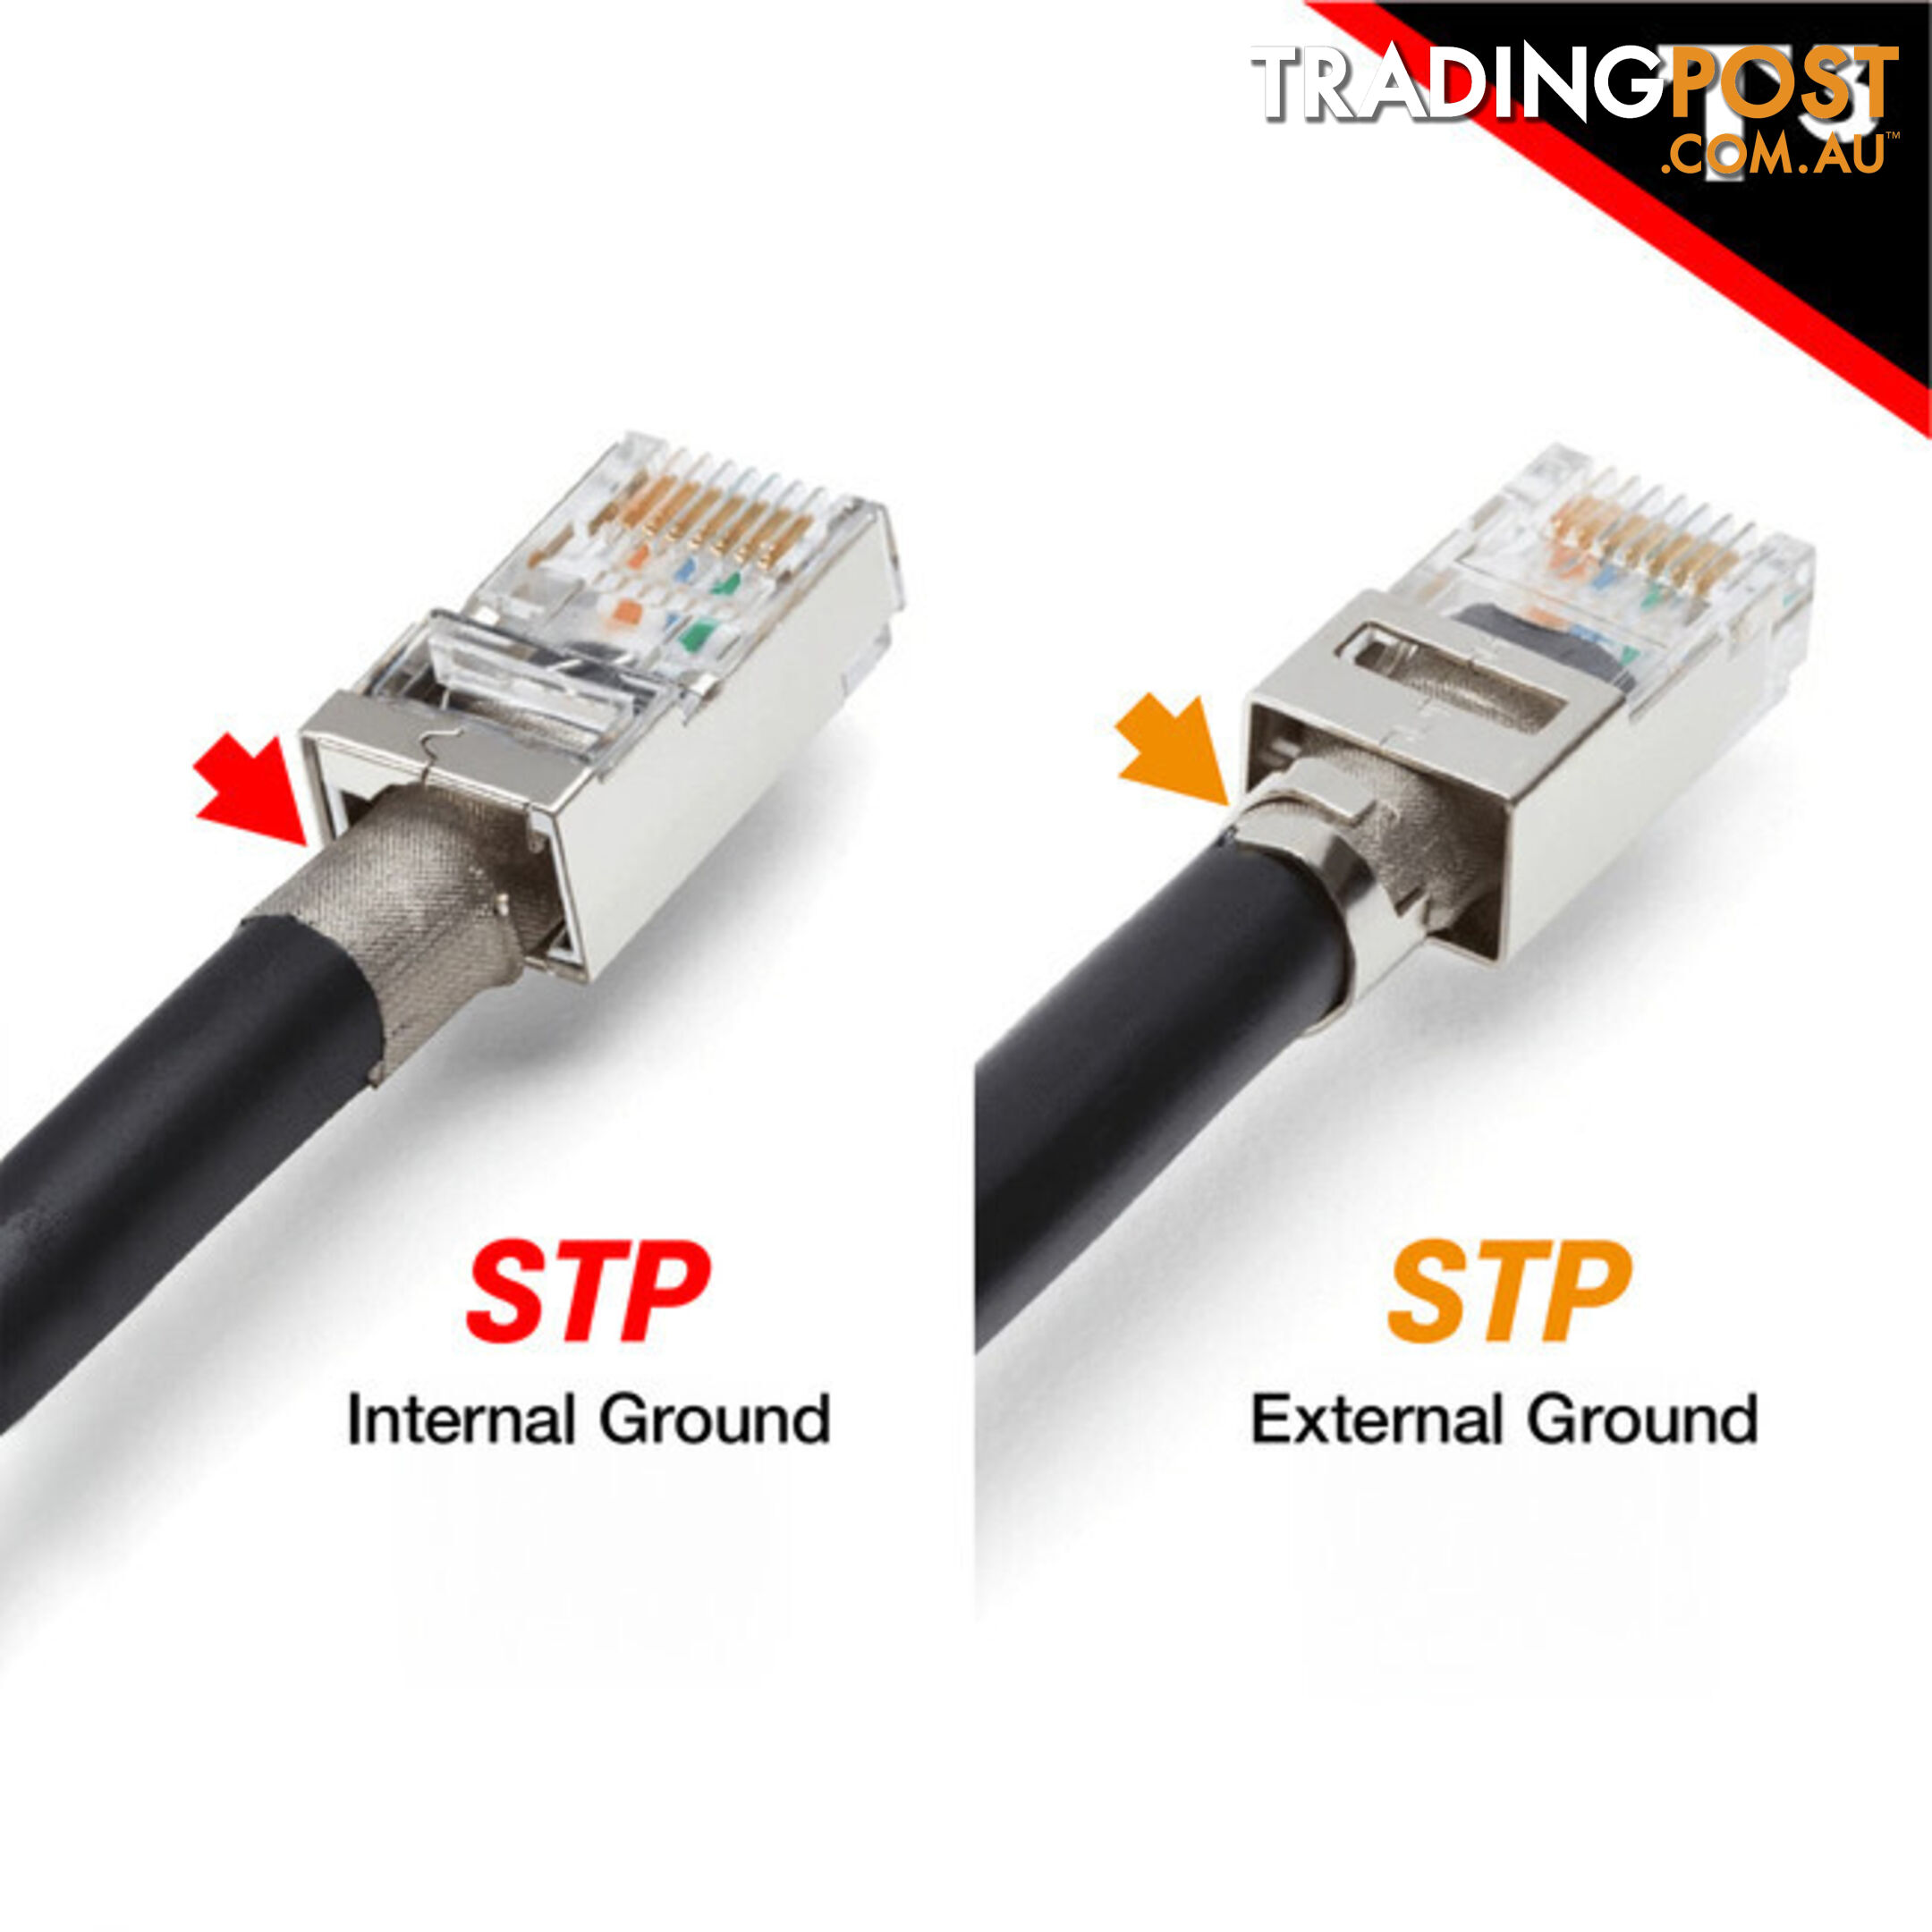 T3SPSC6S-50 STP CAT6A/6 SOLID SNAP PLUG WITH COPPER STRIP RJ45 SHIELDED 1.2MM PACK OF 50